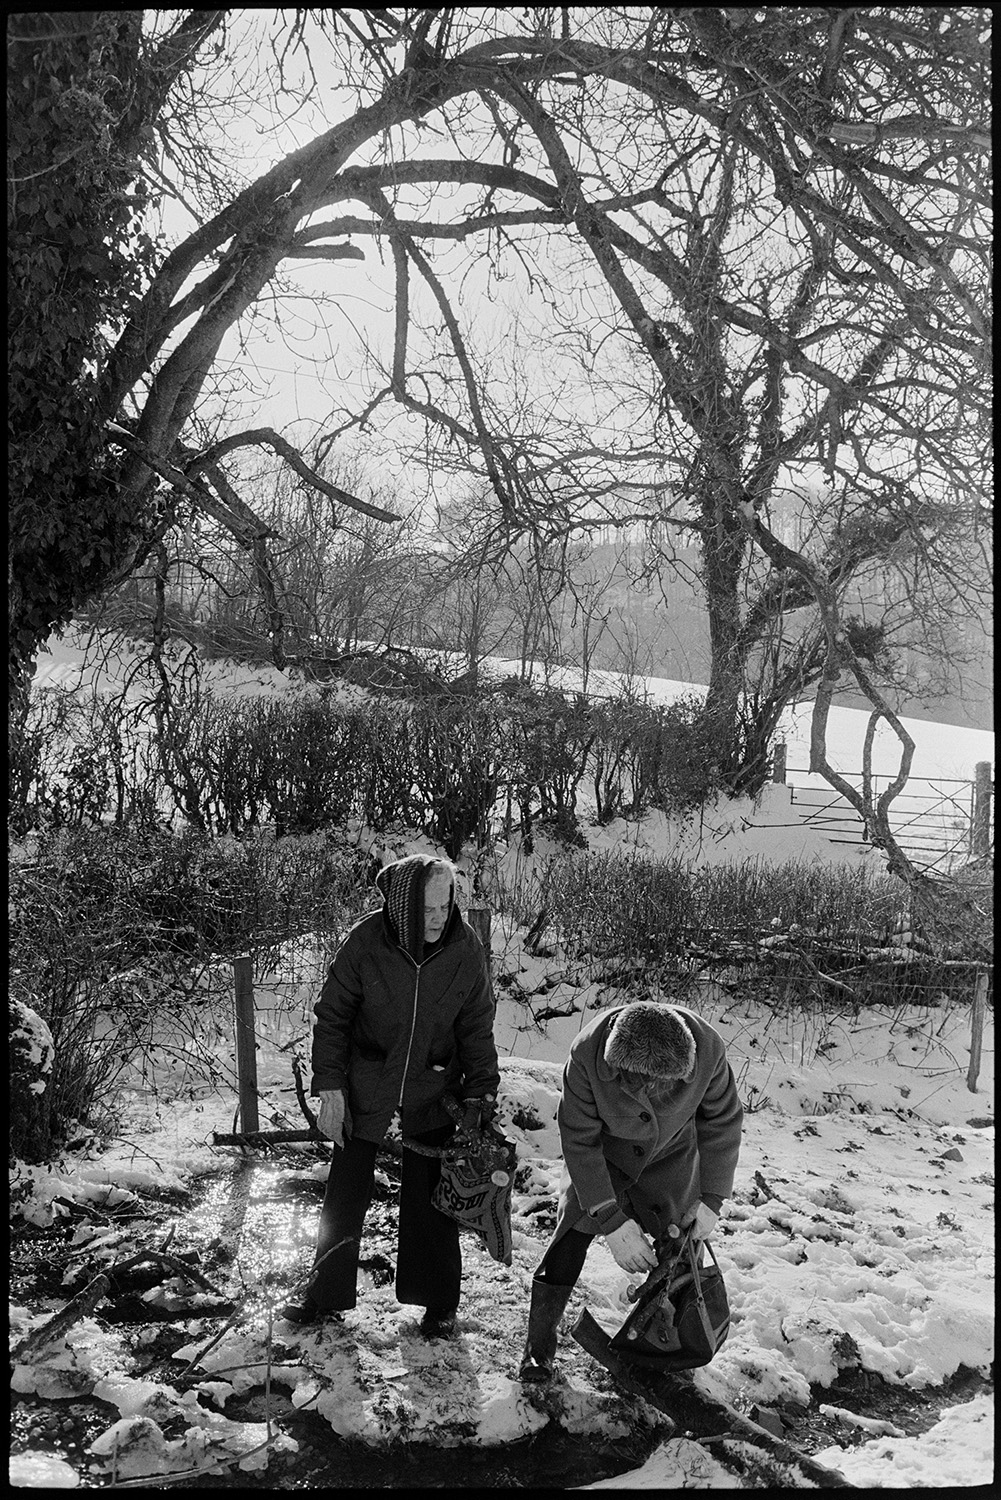 Snow, women gathering wood for fire.
[Two women, dressed in winter clothing, collecting firewood in a snow covered field near West Lane, Dolton.]